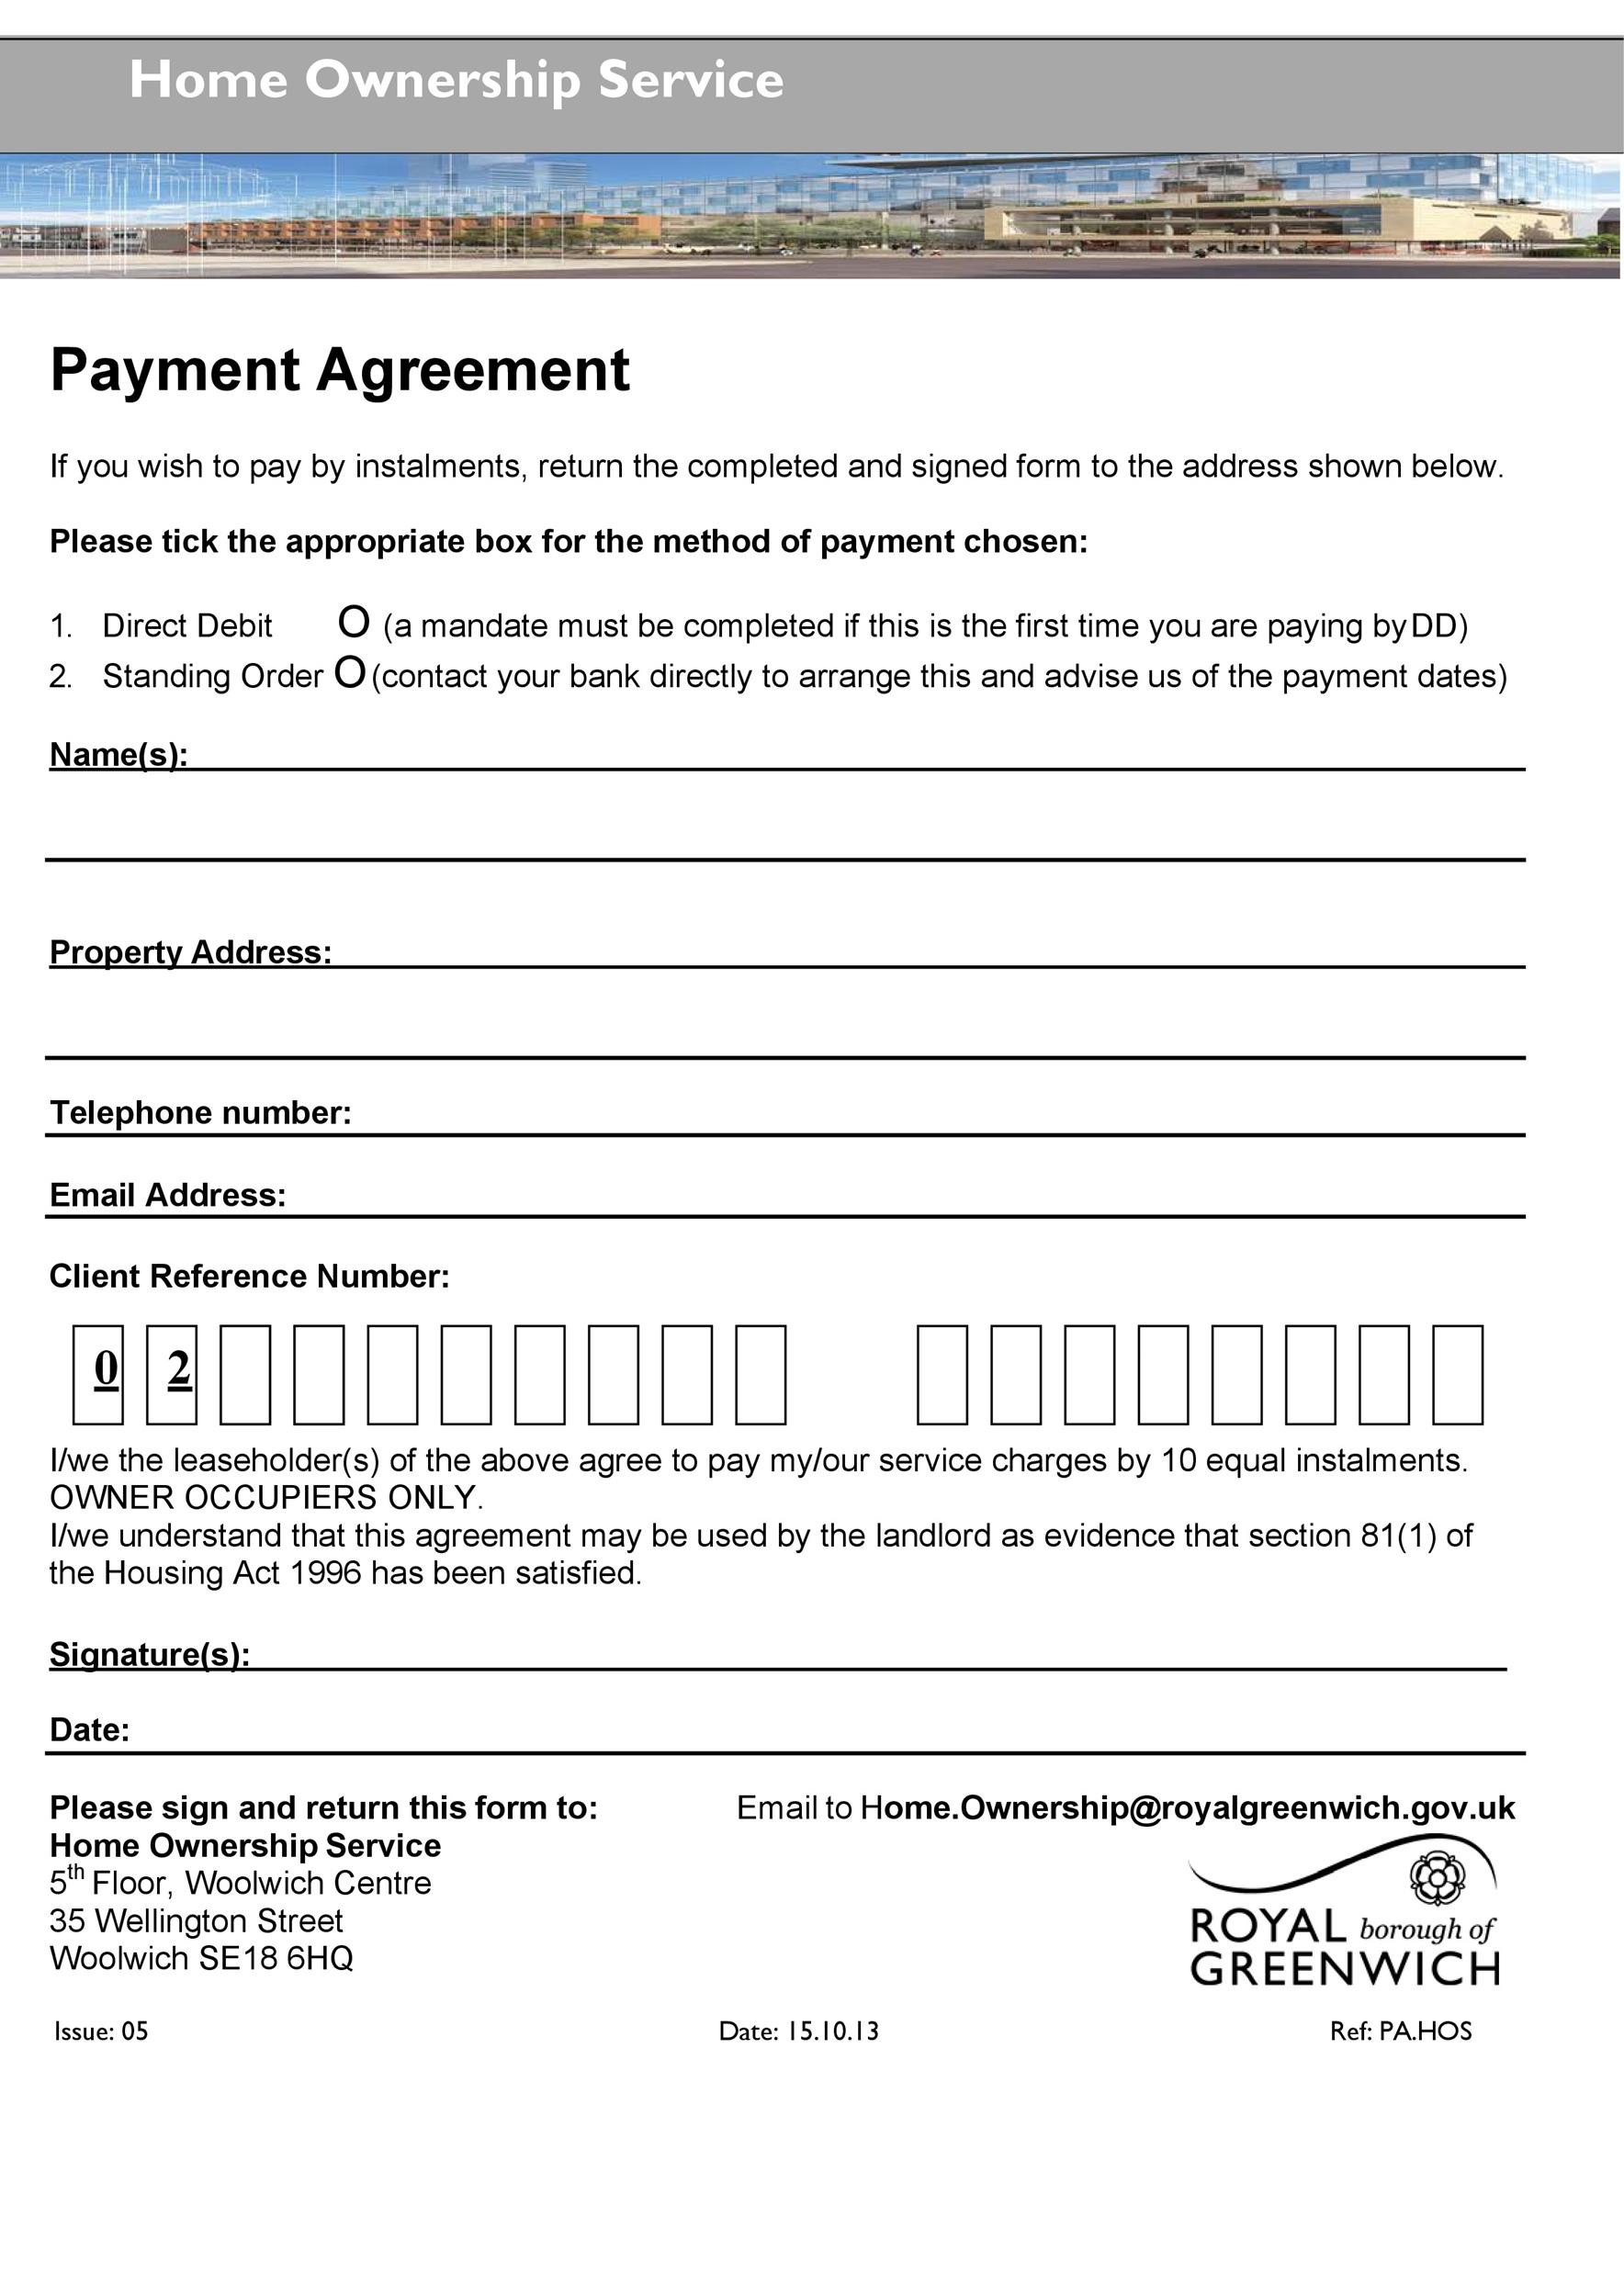 Payment Agreement 40 Templates & Contracts ᐅ TemplateLab